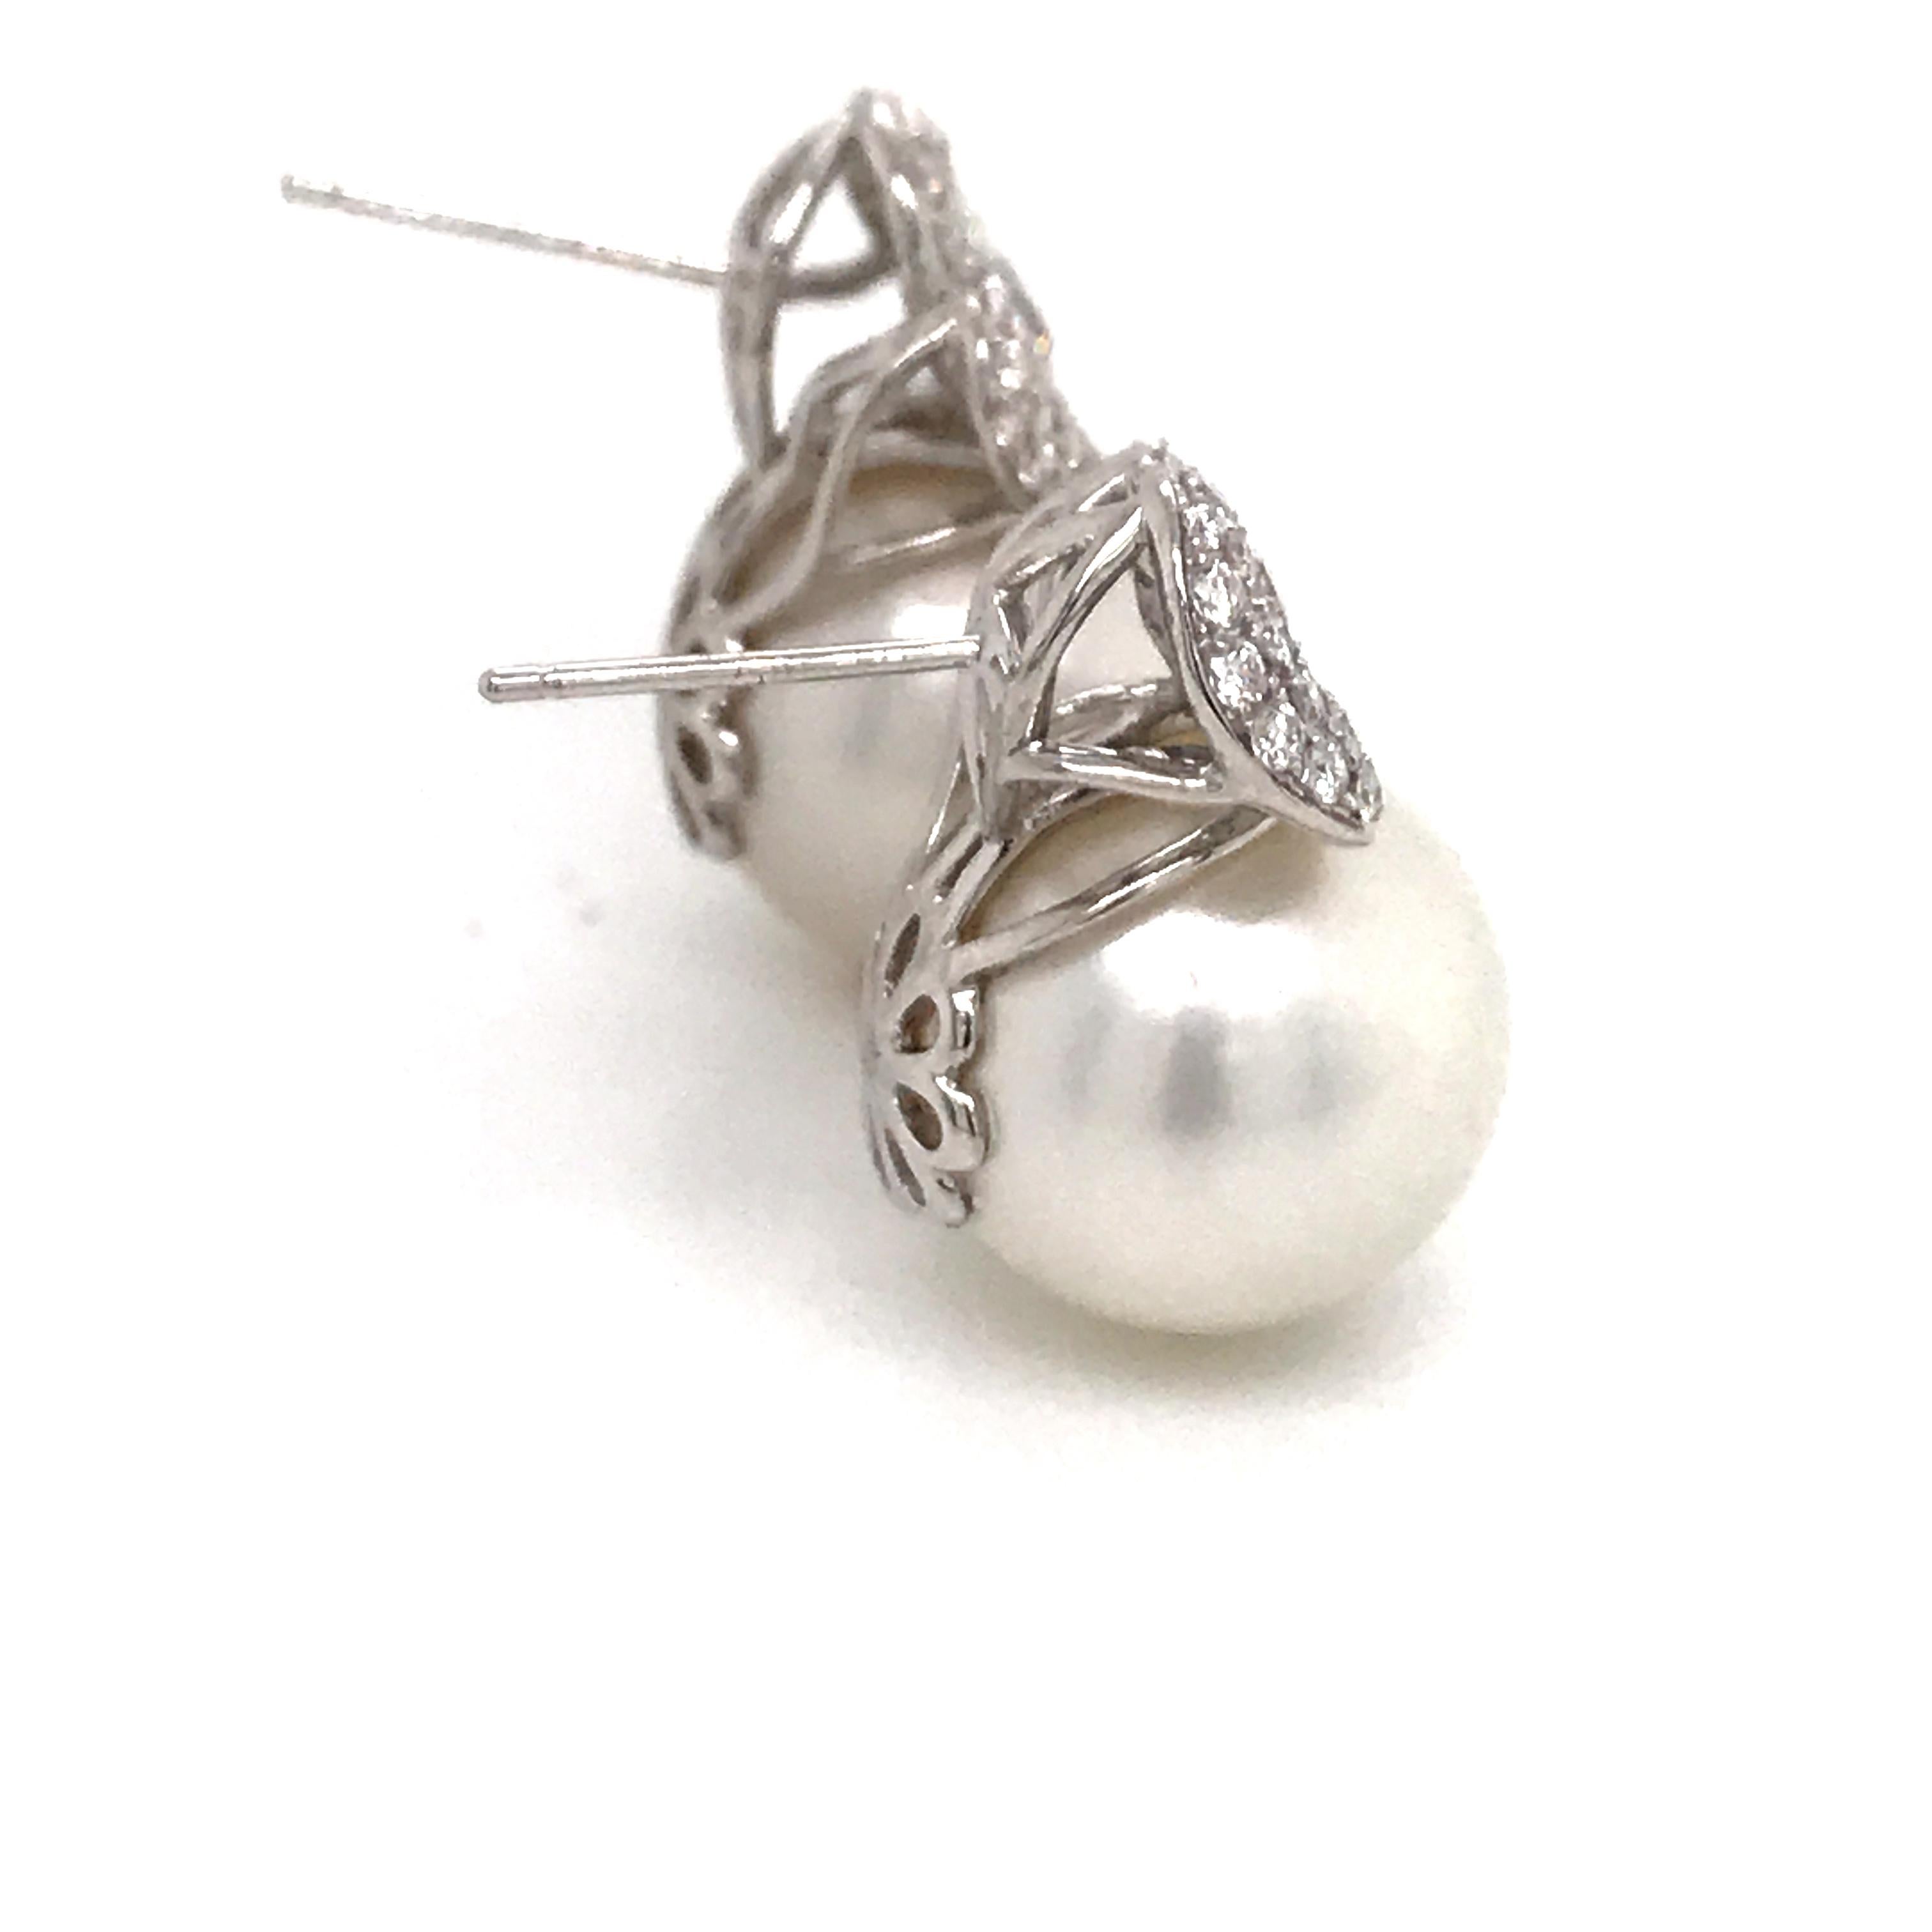 18kt white gold and diamond seaquin dangle earrings with south sea pearl drops